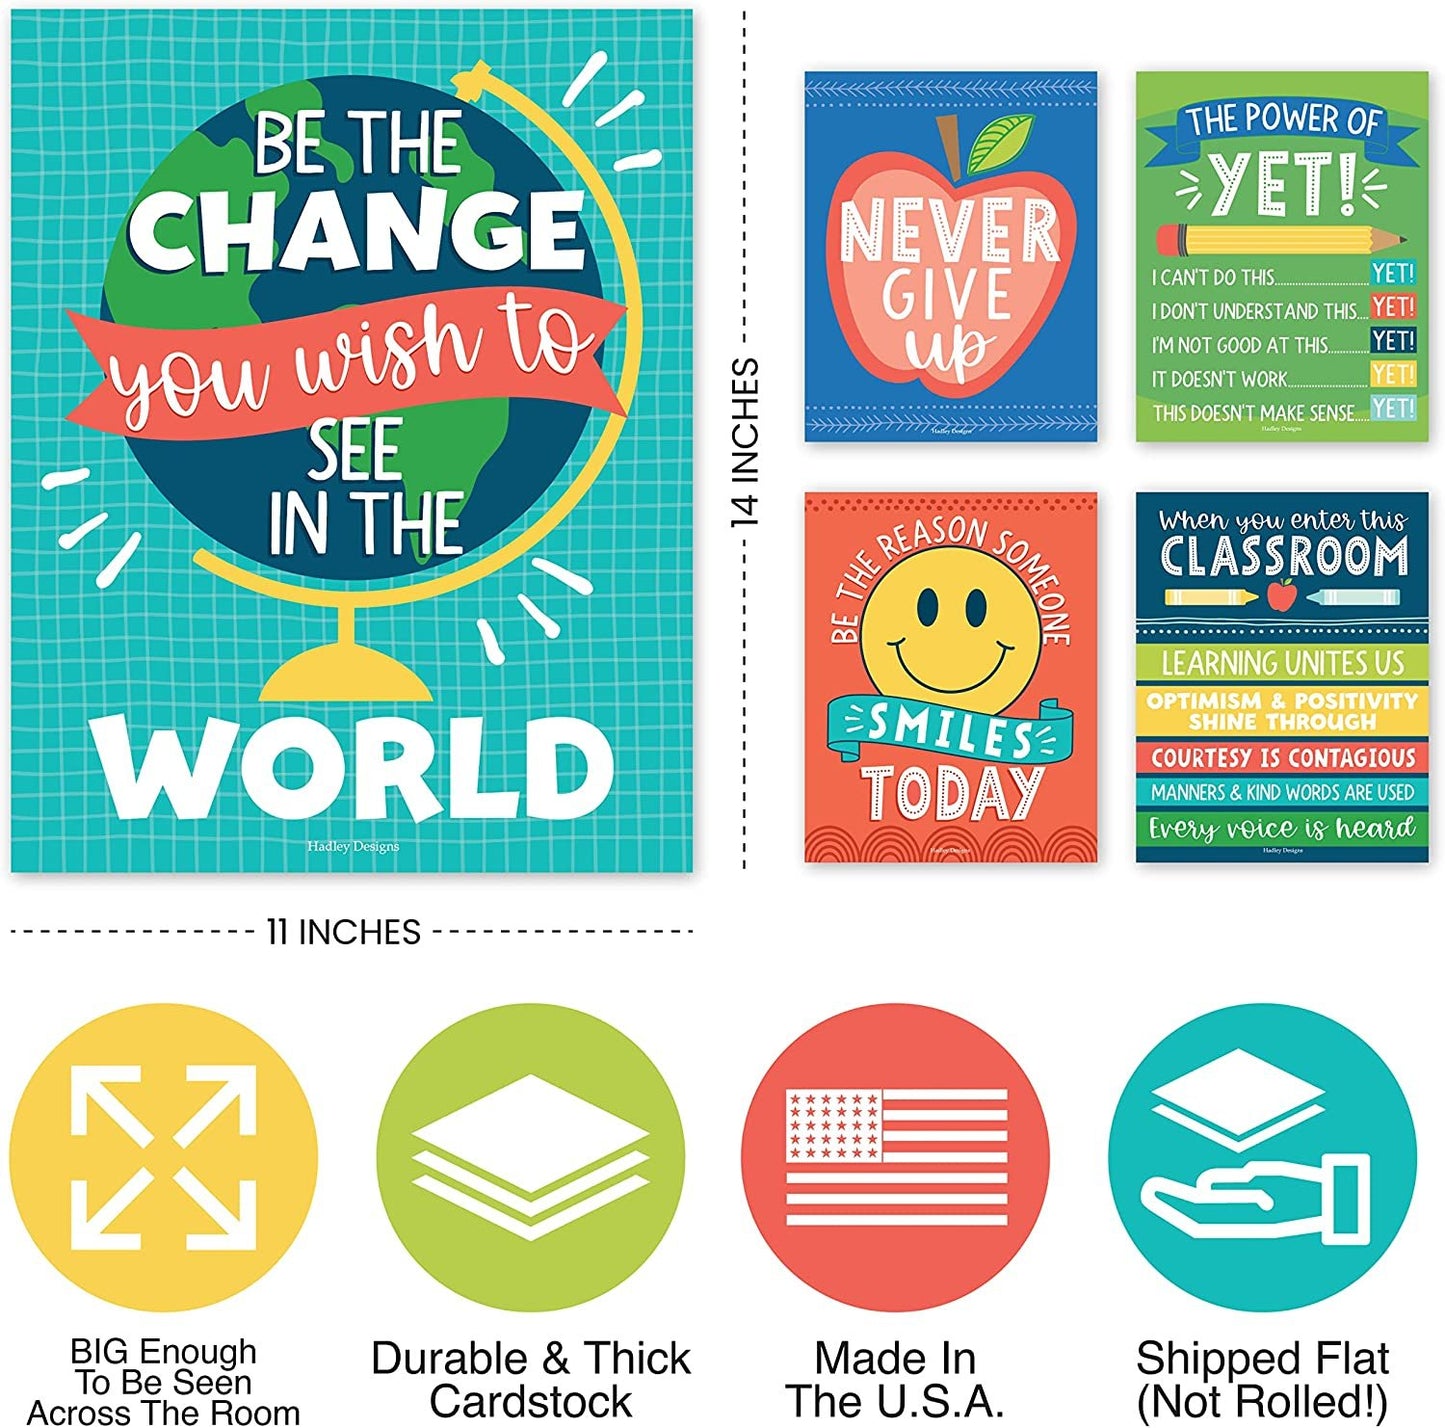 9 Colorful Classroom Decor Signs - Welcome Sign For Classroom Motivational Posters For Classroom Bulletin Board Decorations, Growth Mindset Classroom Posters Elementary, Middle School, Classroom Rules